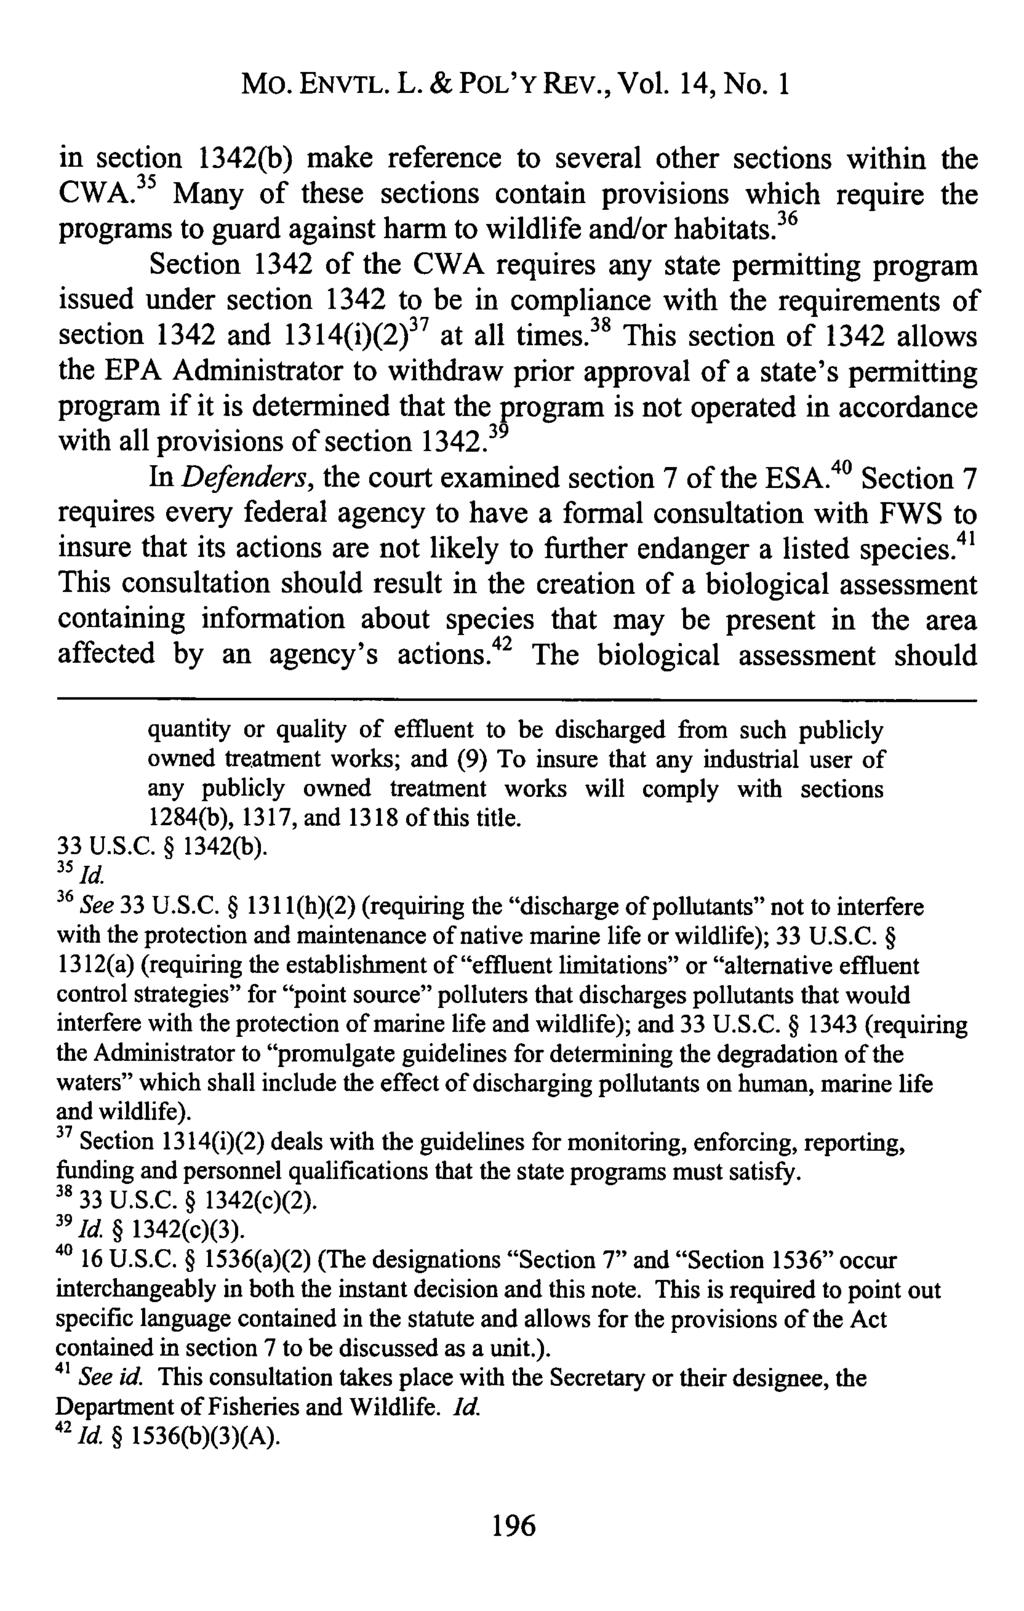 Mo. ENVTL. L. & POL'Y REv., Vol. 14, No. I in section 1342(b) make reference to several other sections within the CWA.